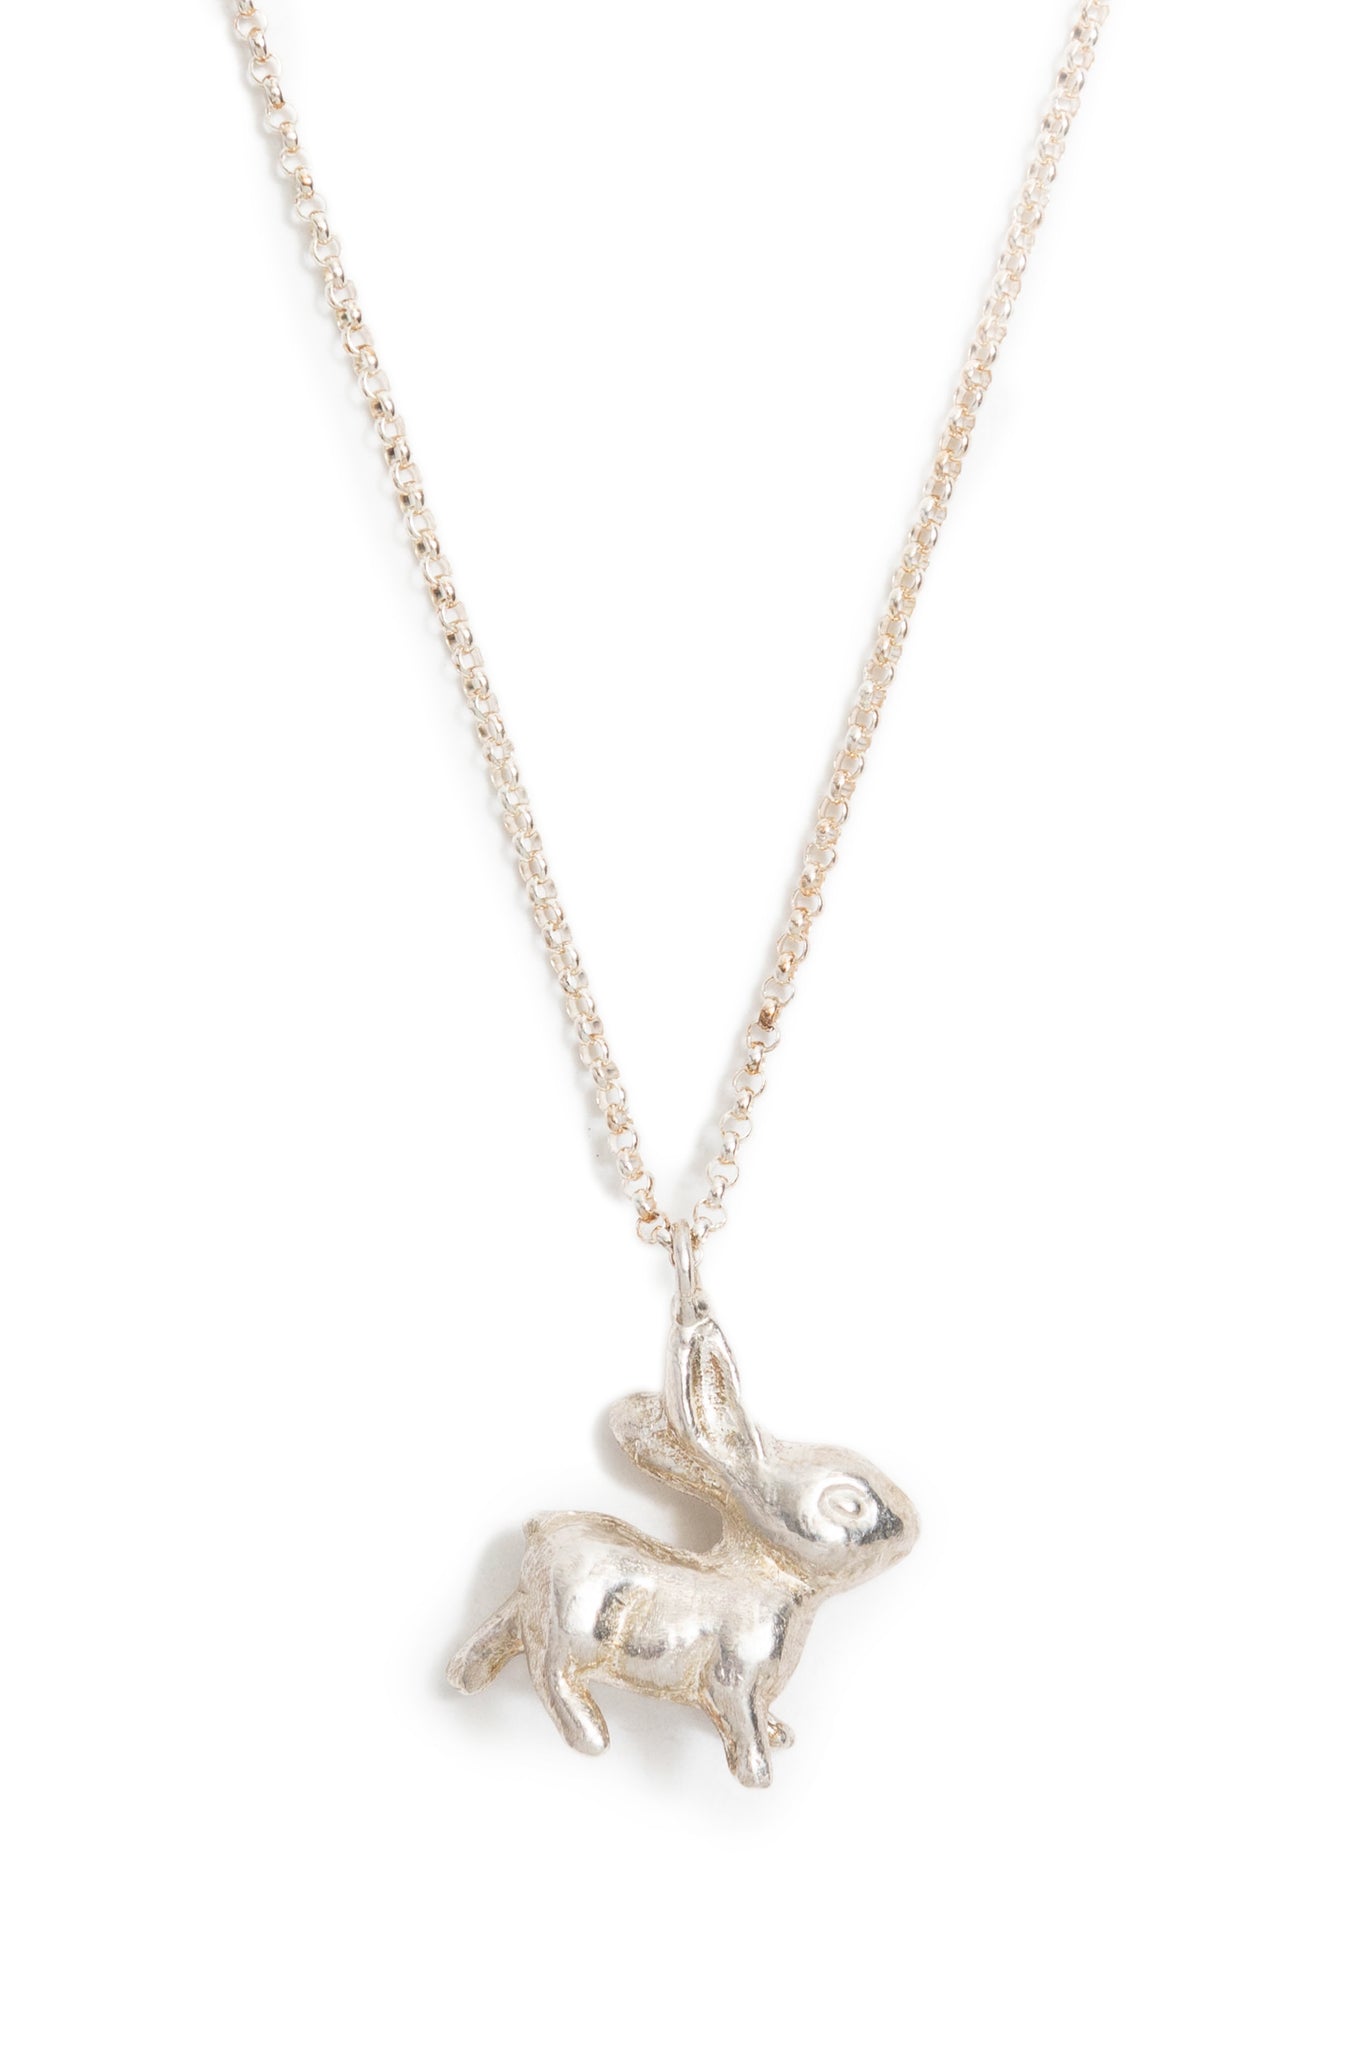 CAT LUCK "Some Bunny" Sterling Silver Necklace